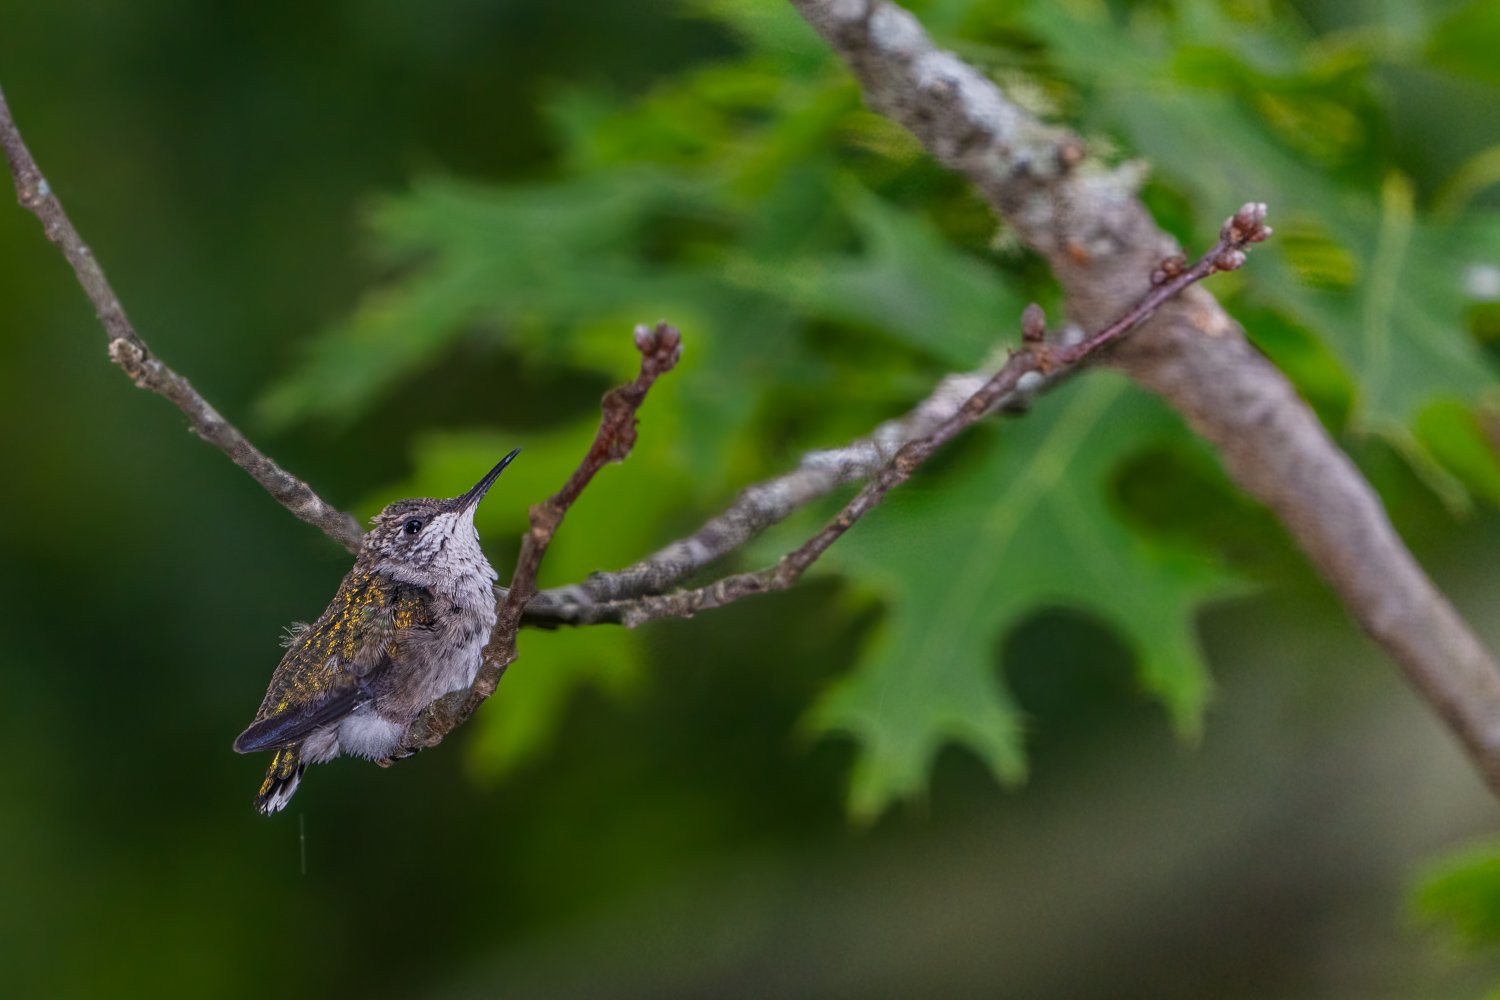  Timing is everything. Somehow,  I spotted this newly fledged chick on a branch. 